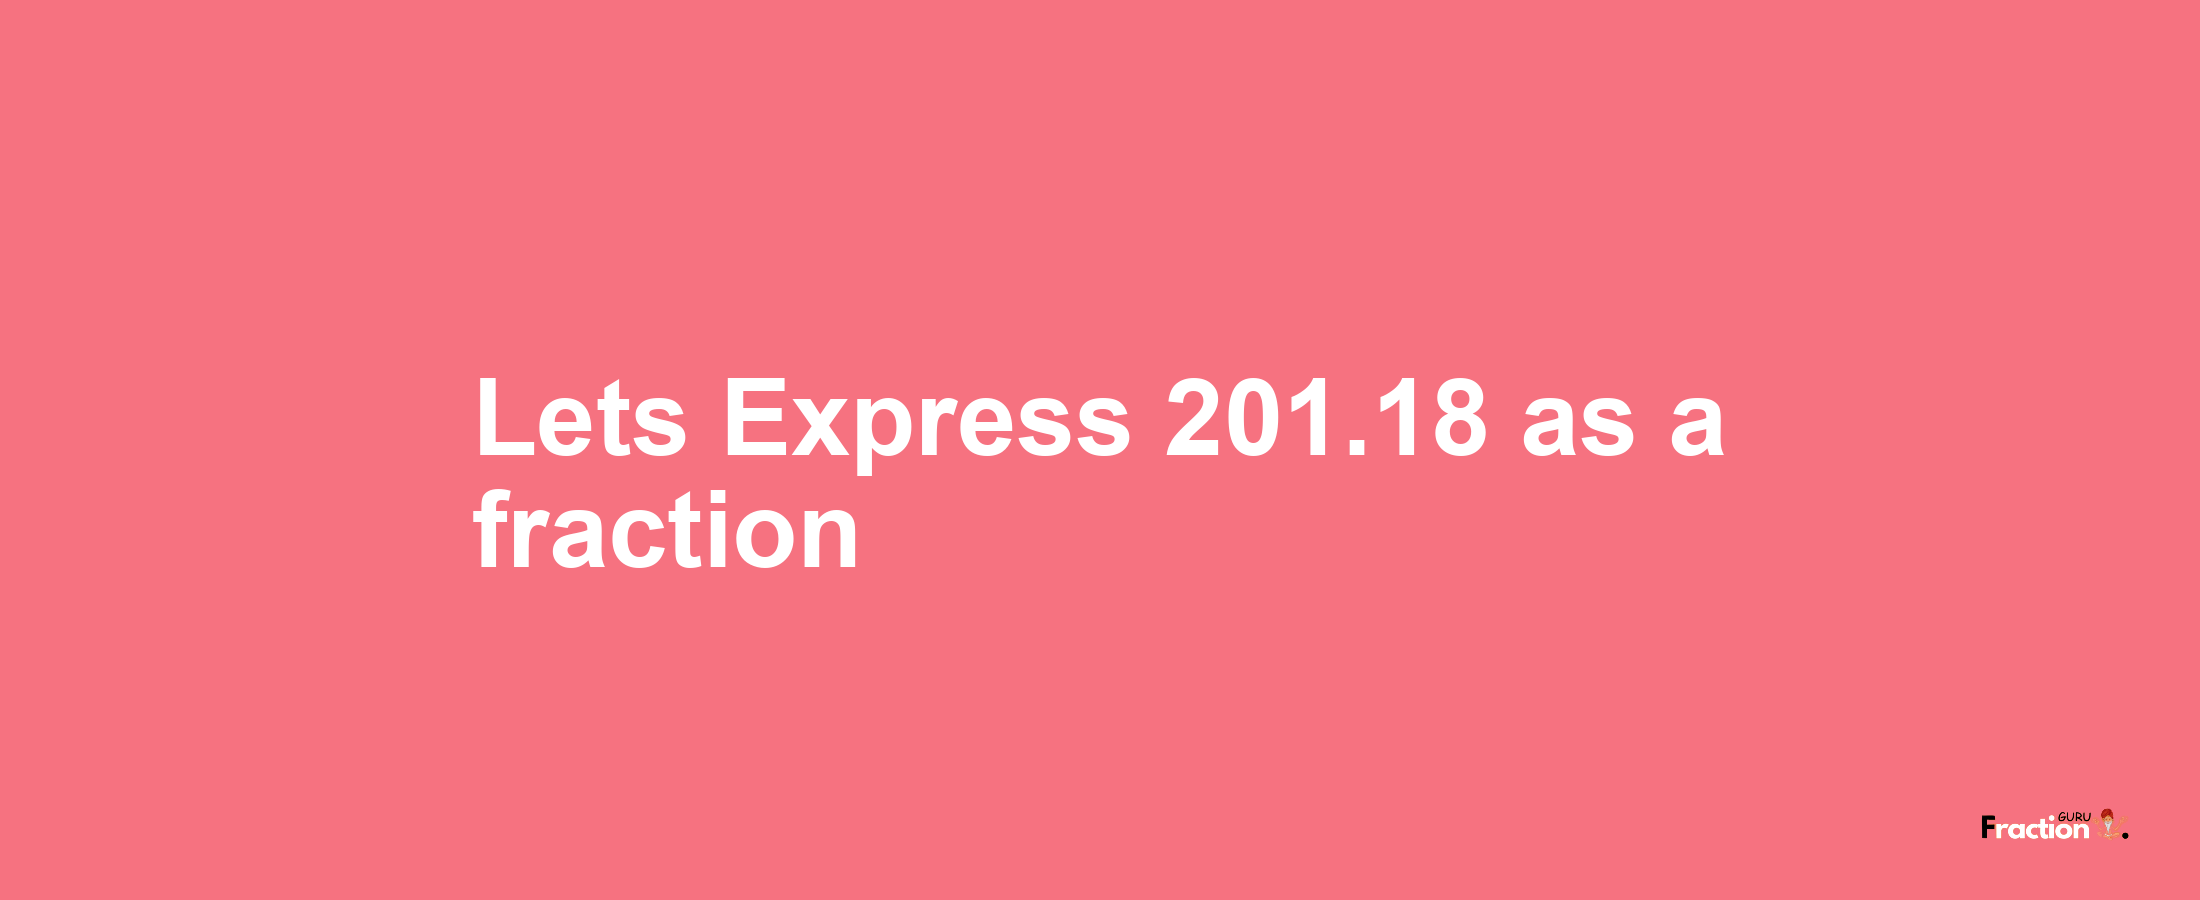 Lets Express 201.18 as afraction